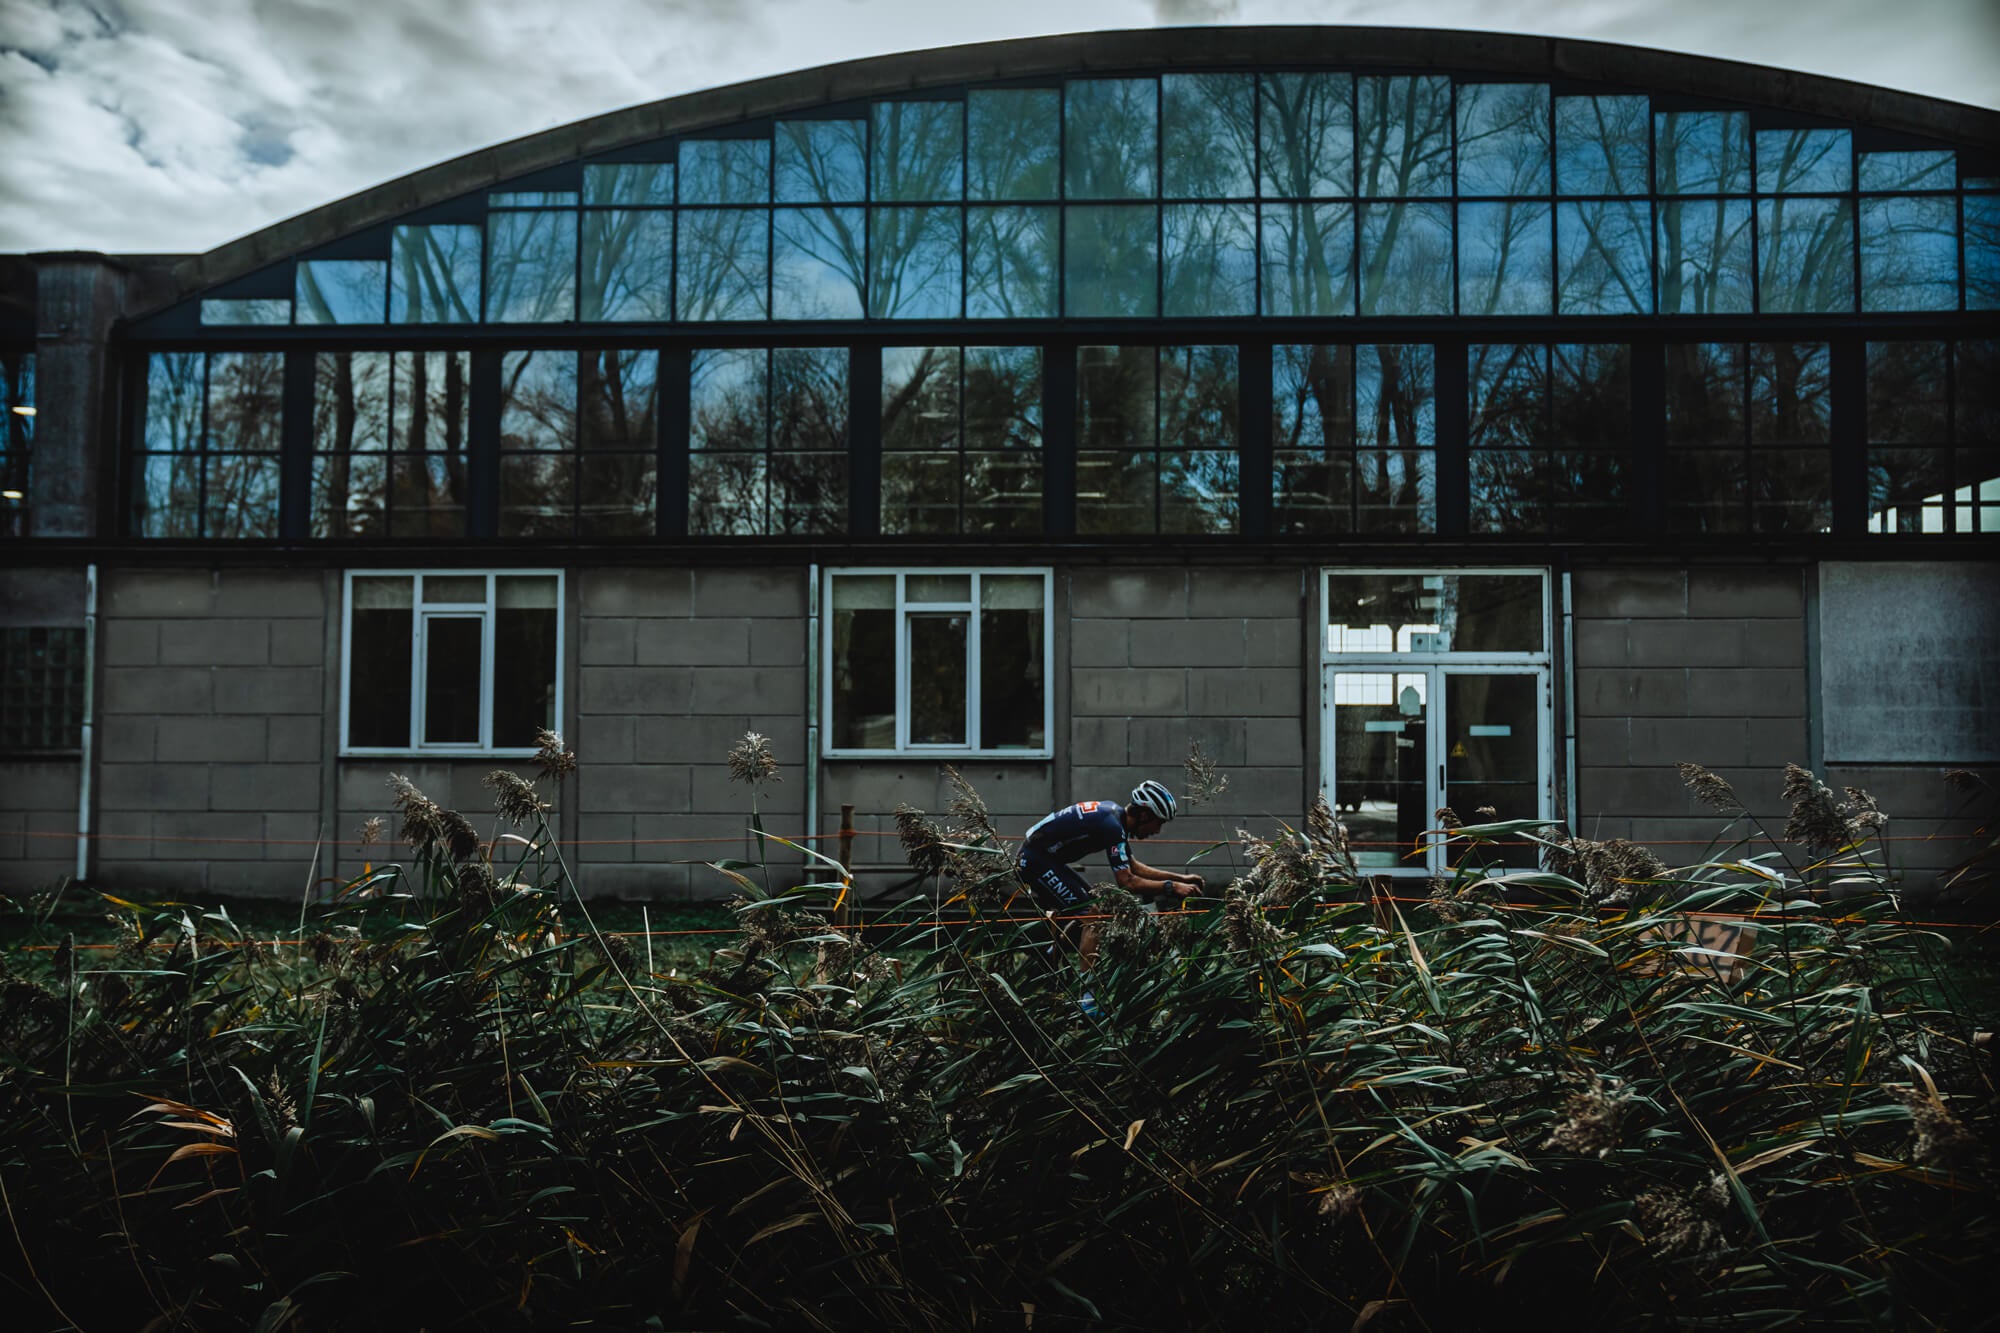 Bicycle racer going past a building with shrubs in foreground.